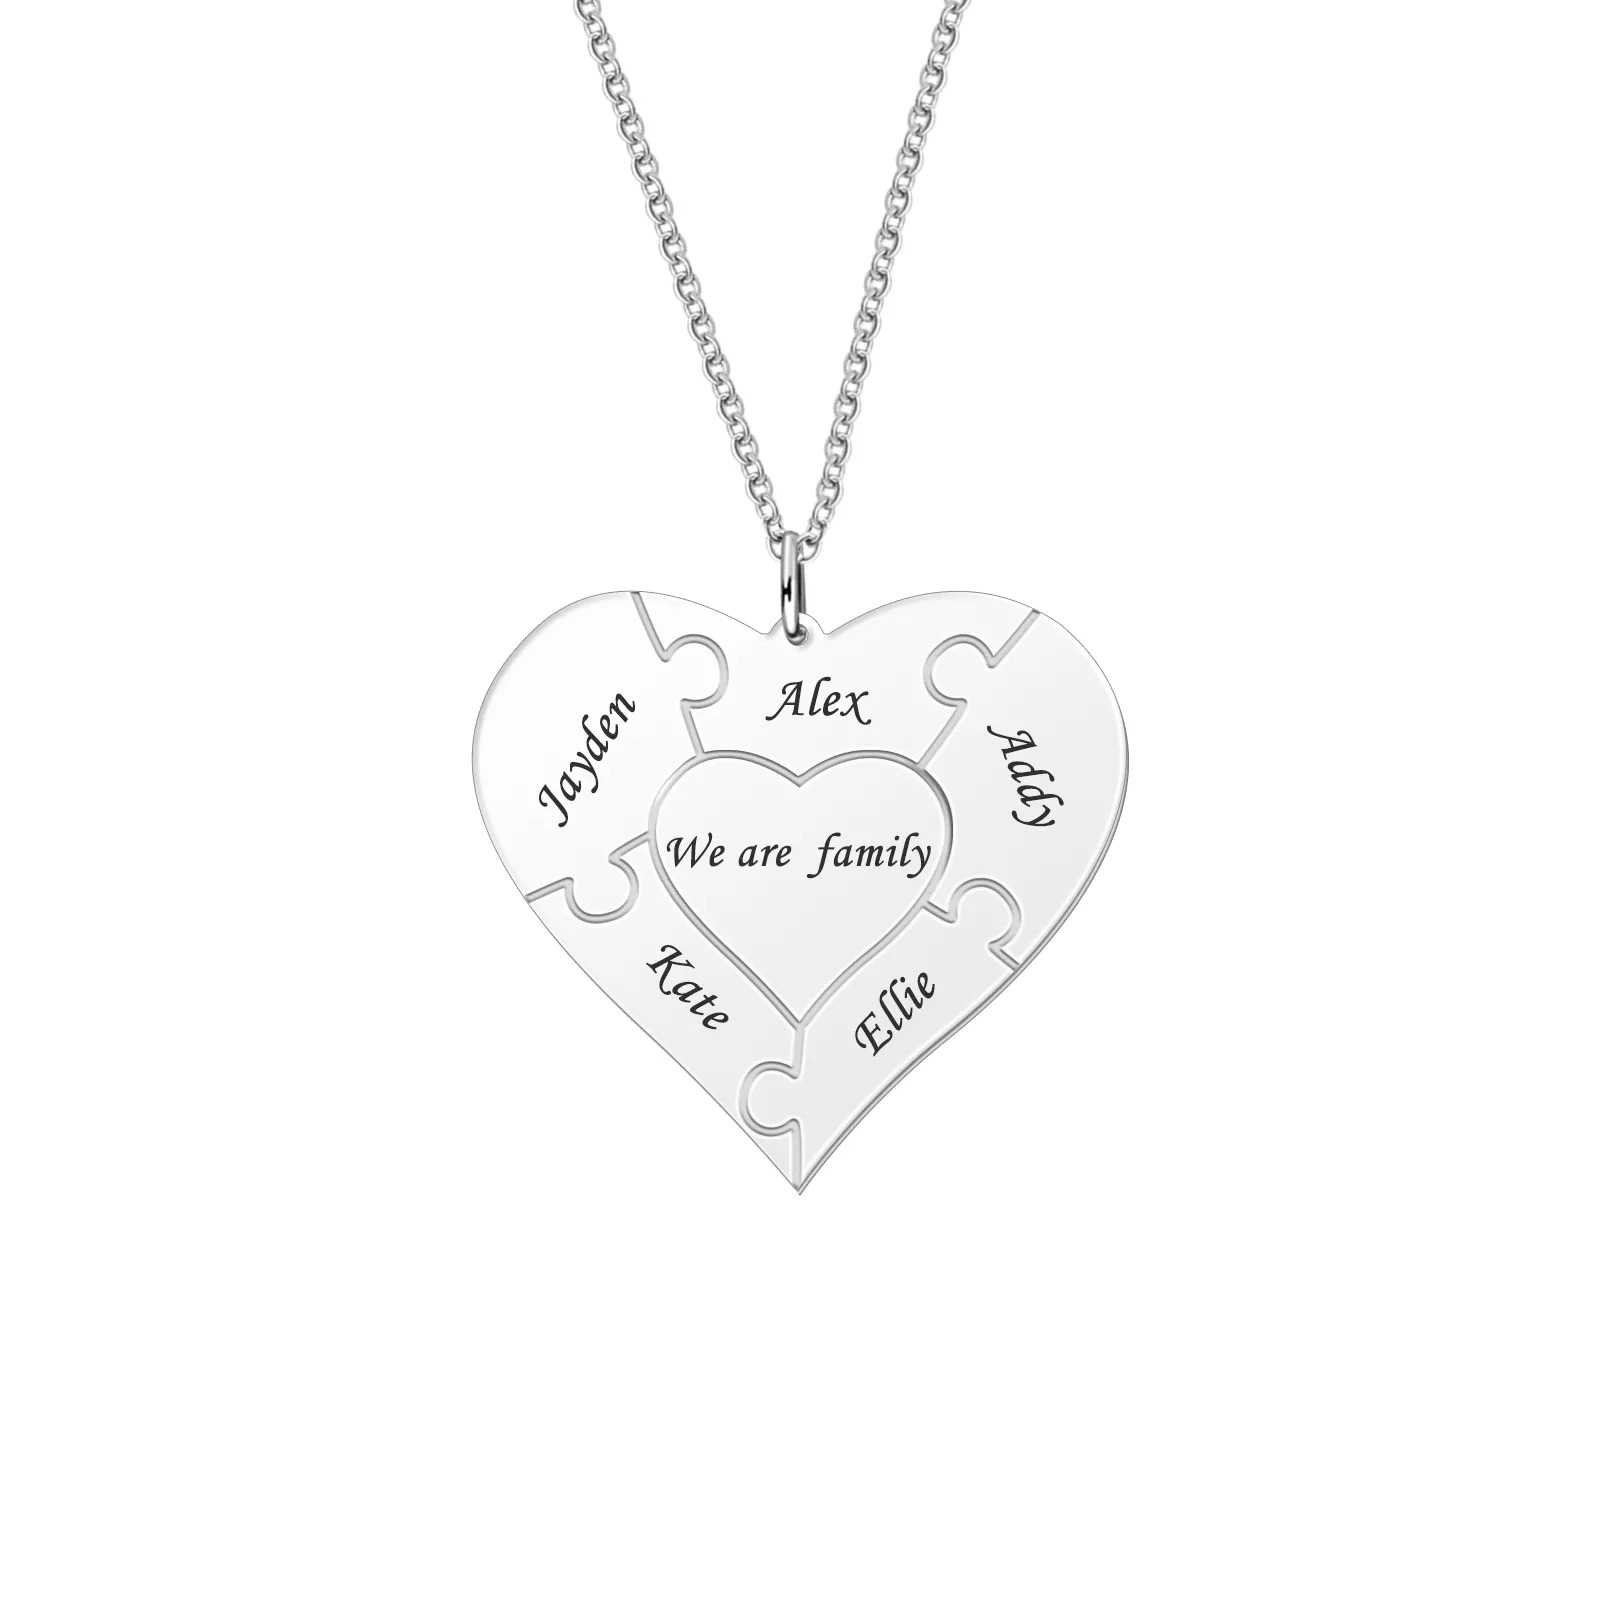 Personalized Puzzle Necklace Family Neckalce with Engraved Names